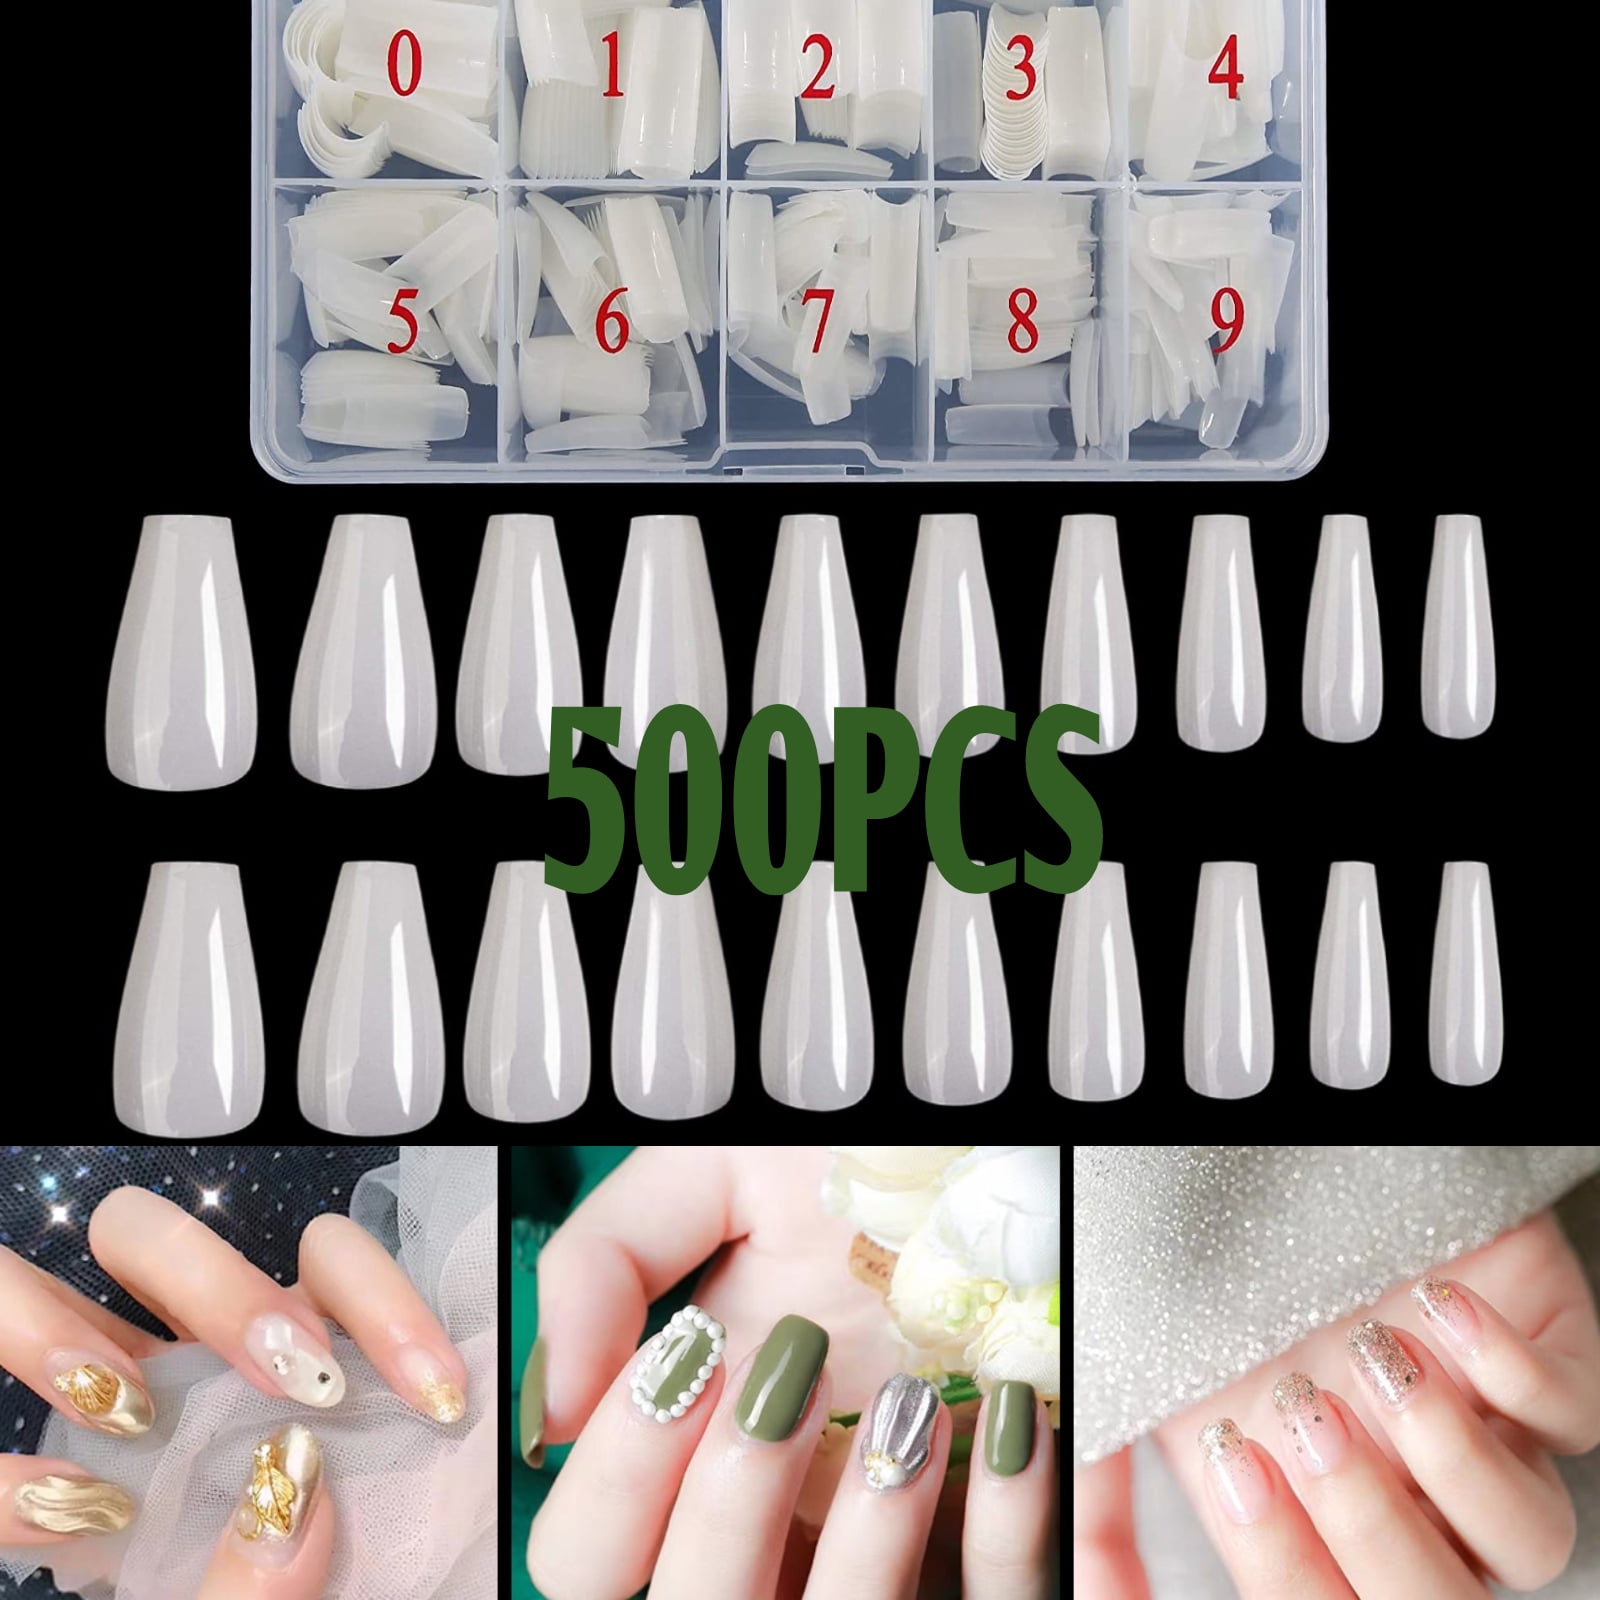 EEEkit Artificial Natural/Clear Full Cover Ballerina Acrylic Fake Nail Tips  Press on False Nails for DIY Nail Art Design Decoration Accessories 10  Sizes with Box, Long Flat, 500 Pieces - Walmart.com